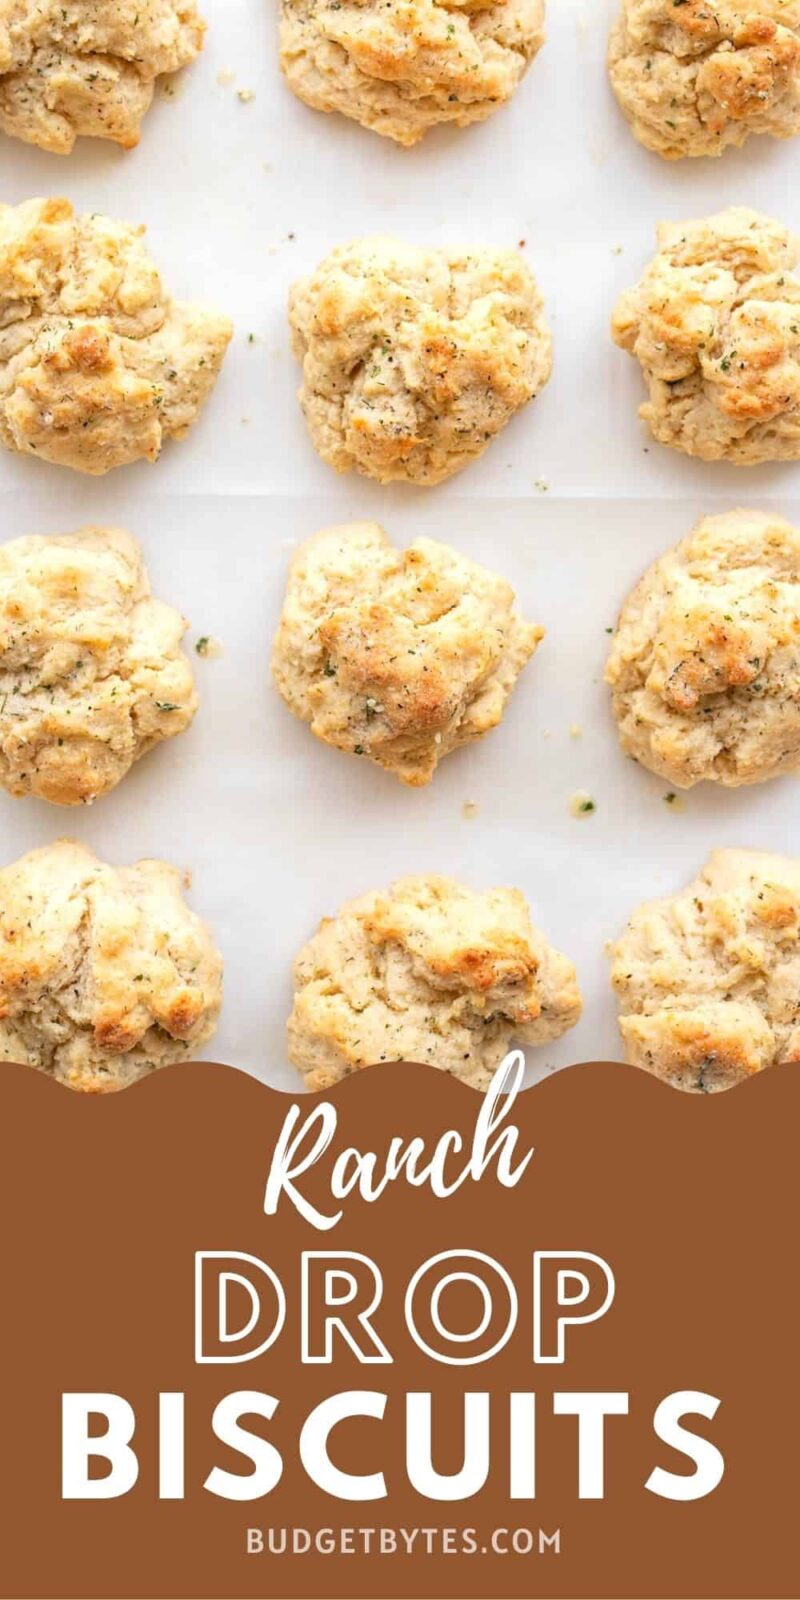 overhead view of ranch drop biscuits on the baking sheet, title text at the bottom